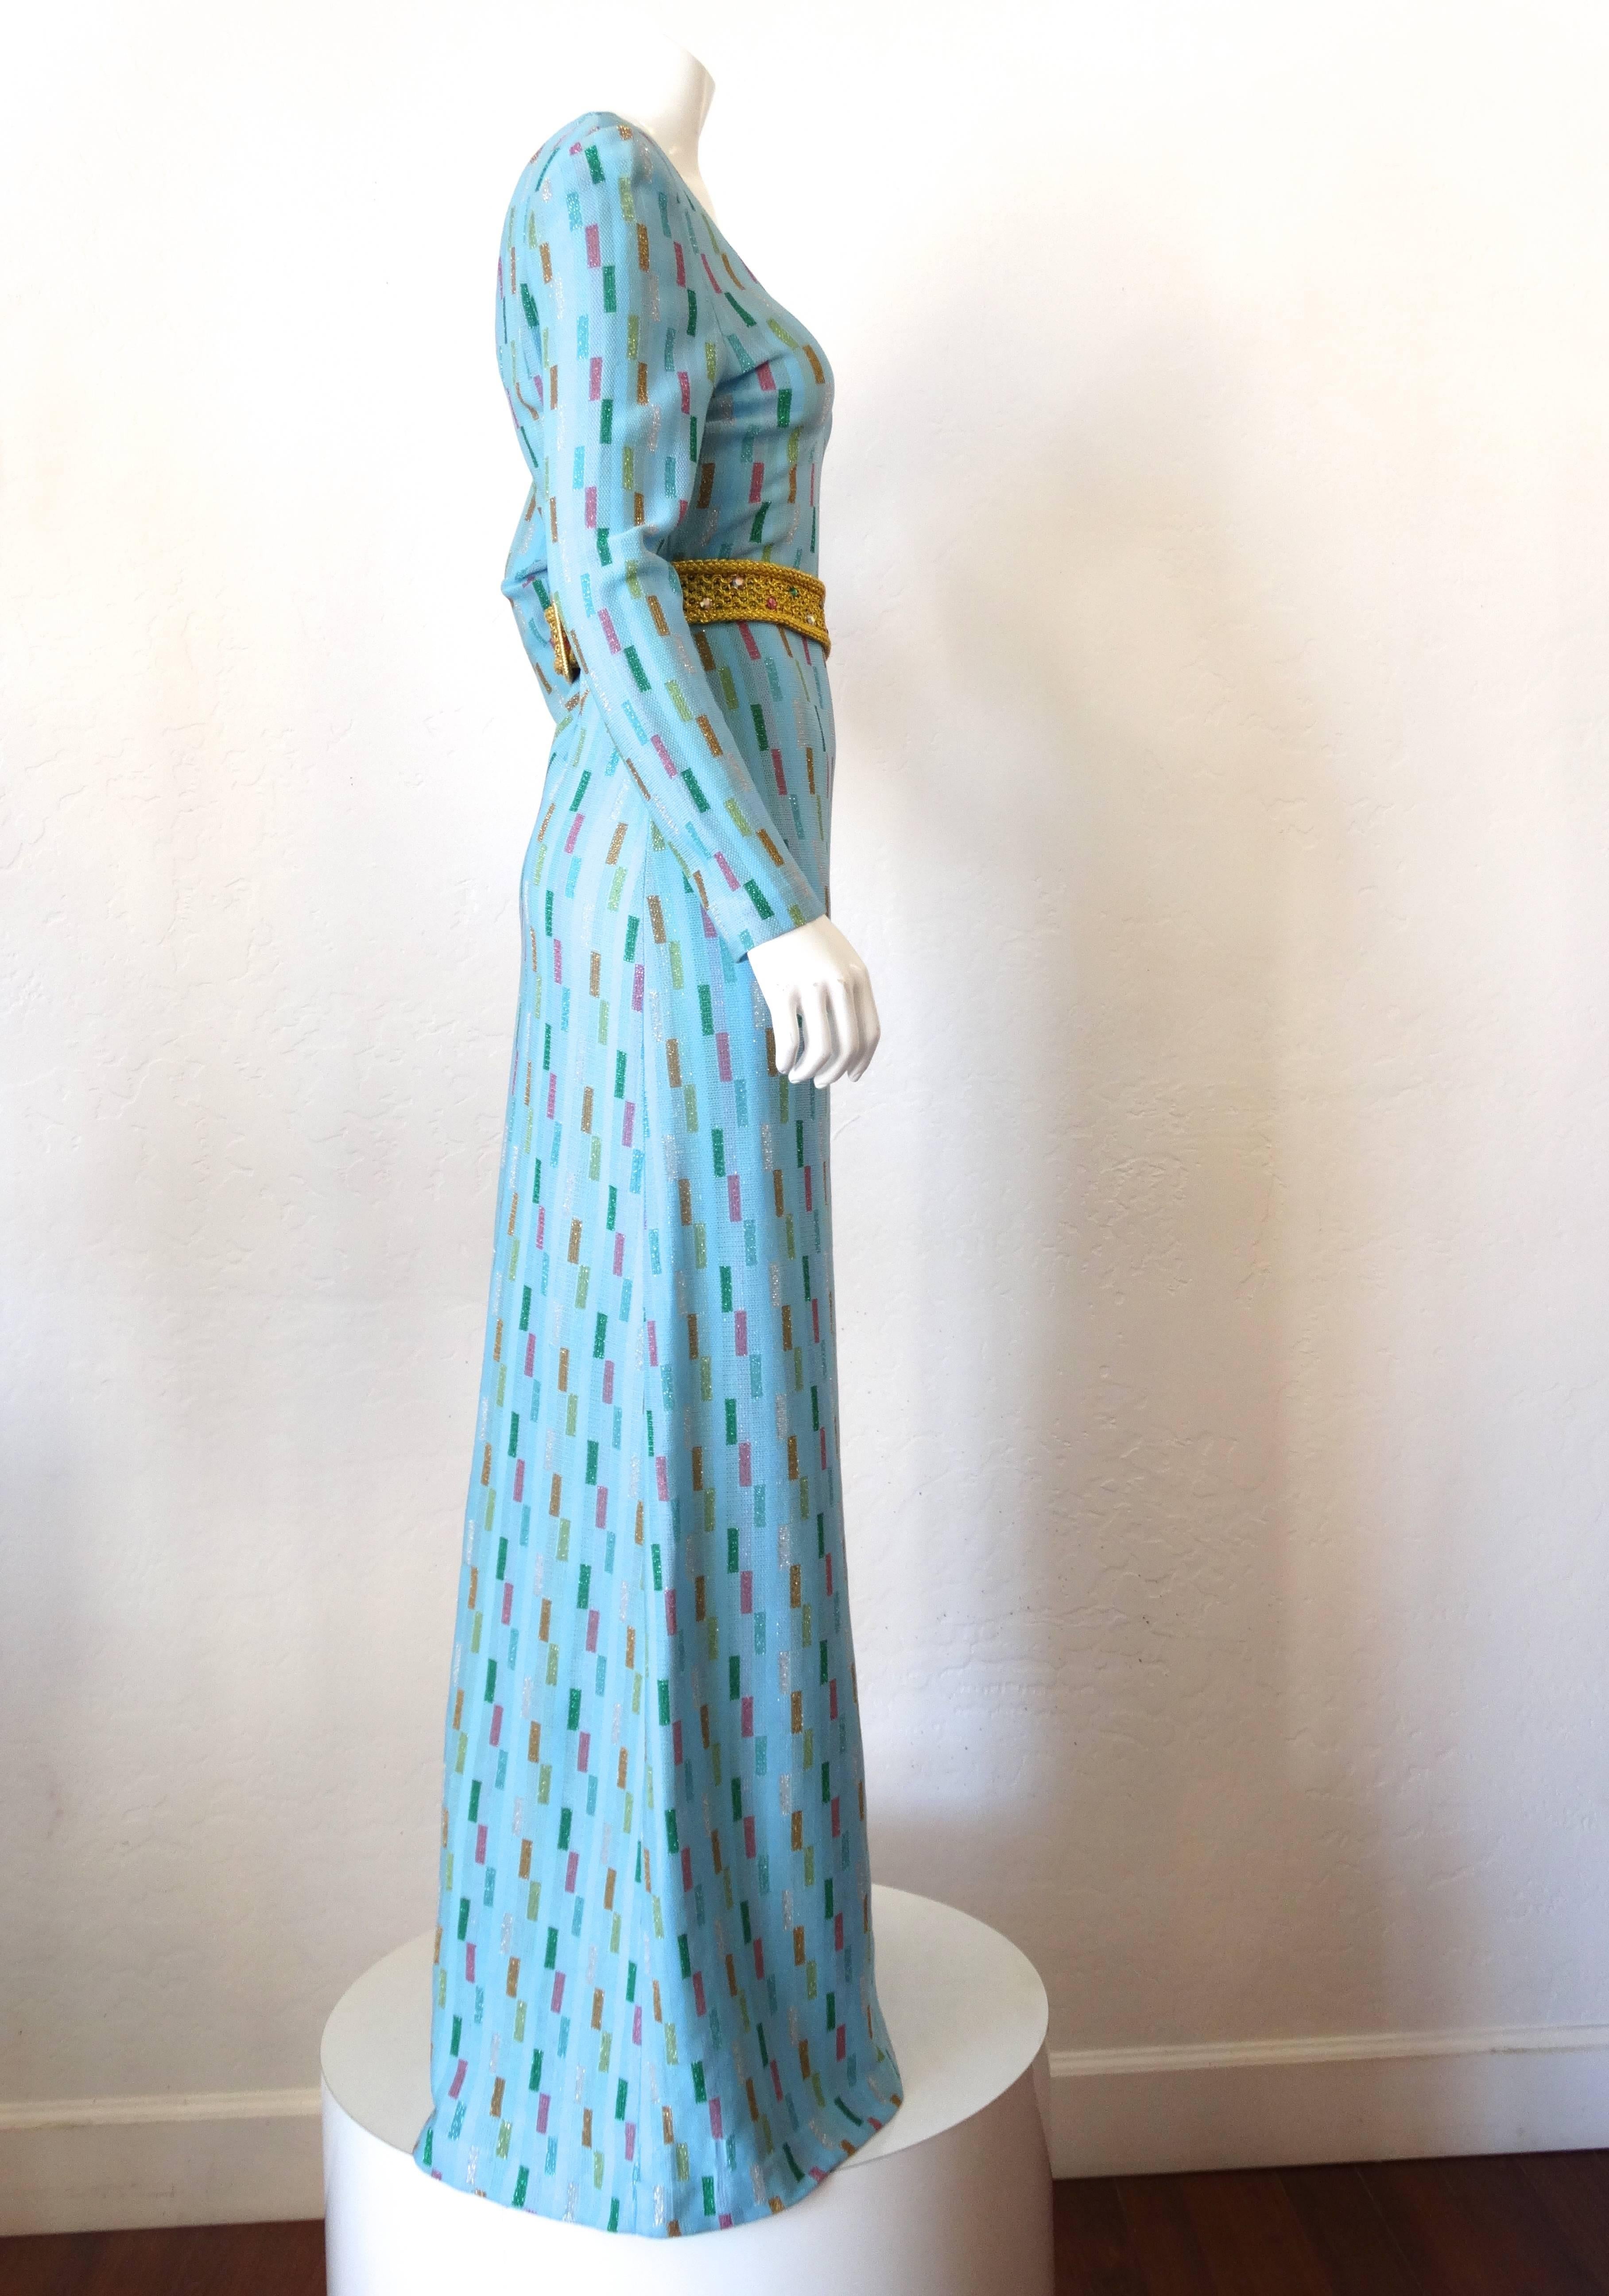 Simply stunning this beautiful 1970s closures super model length gown is in the most beautiful turquoise blue knit with a 3D rectangular. knit print in multicolored rectangles (green, gold, pink, silver and copper) with low cut front and back,